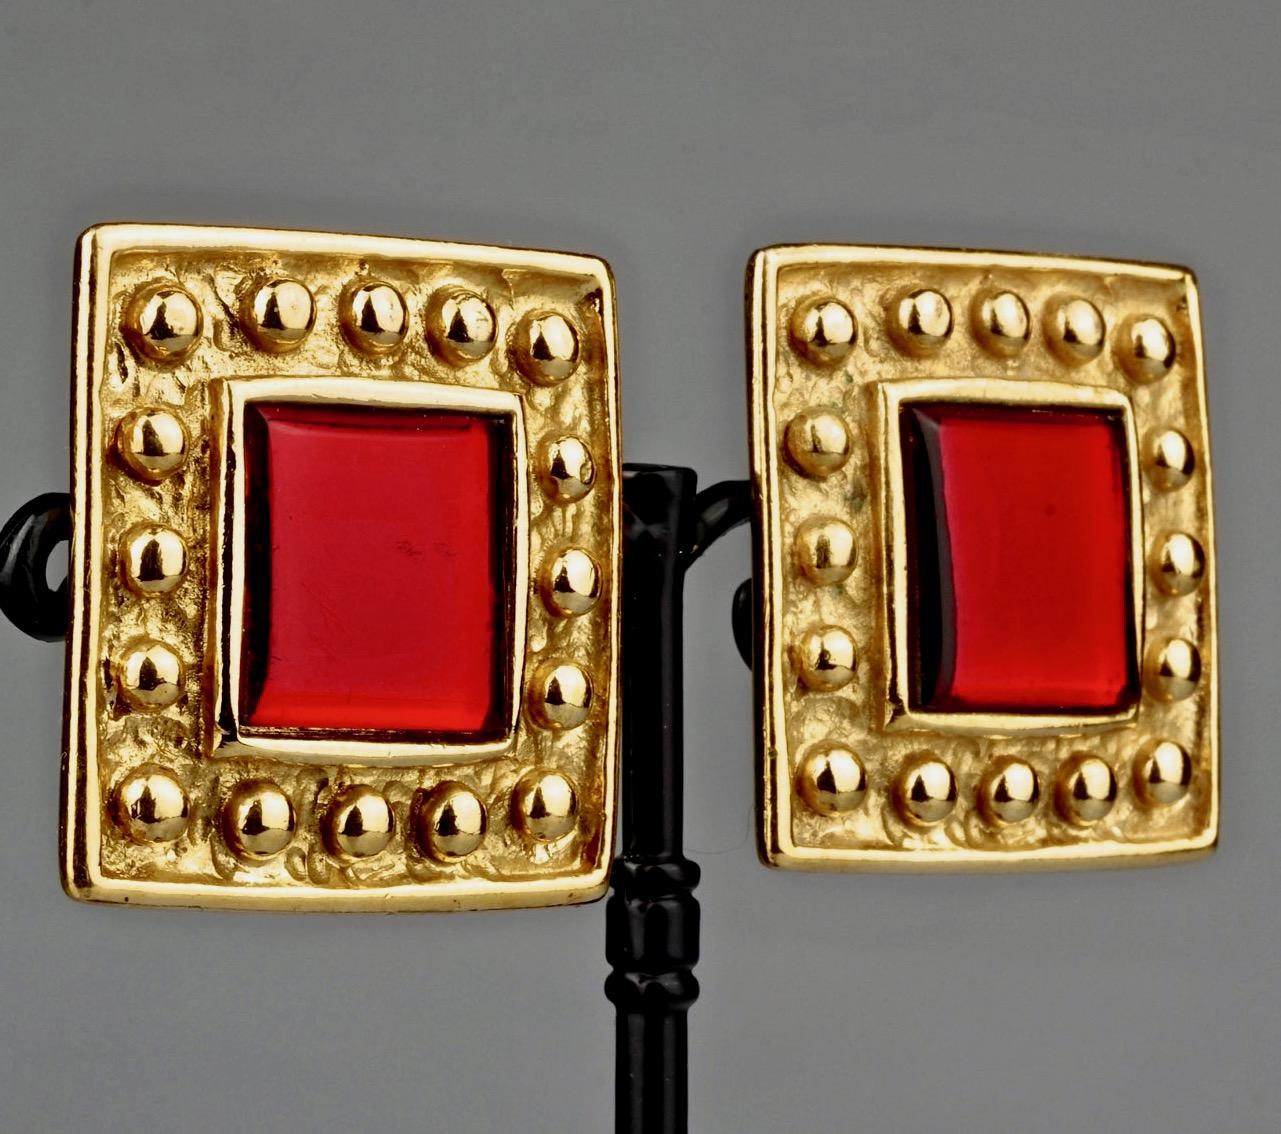 Vintage YVES SAINT LAURENT Ysl Red Square Studded Earrings In Excellent Condition For Sale In Kingersheim, Alsace